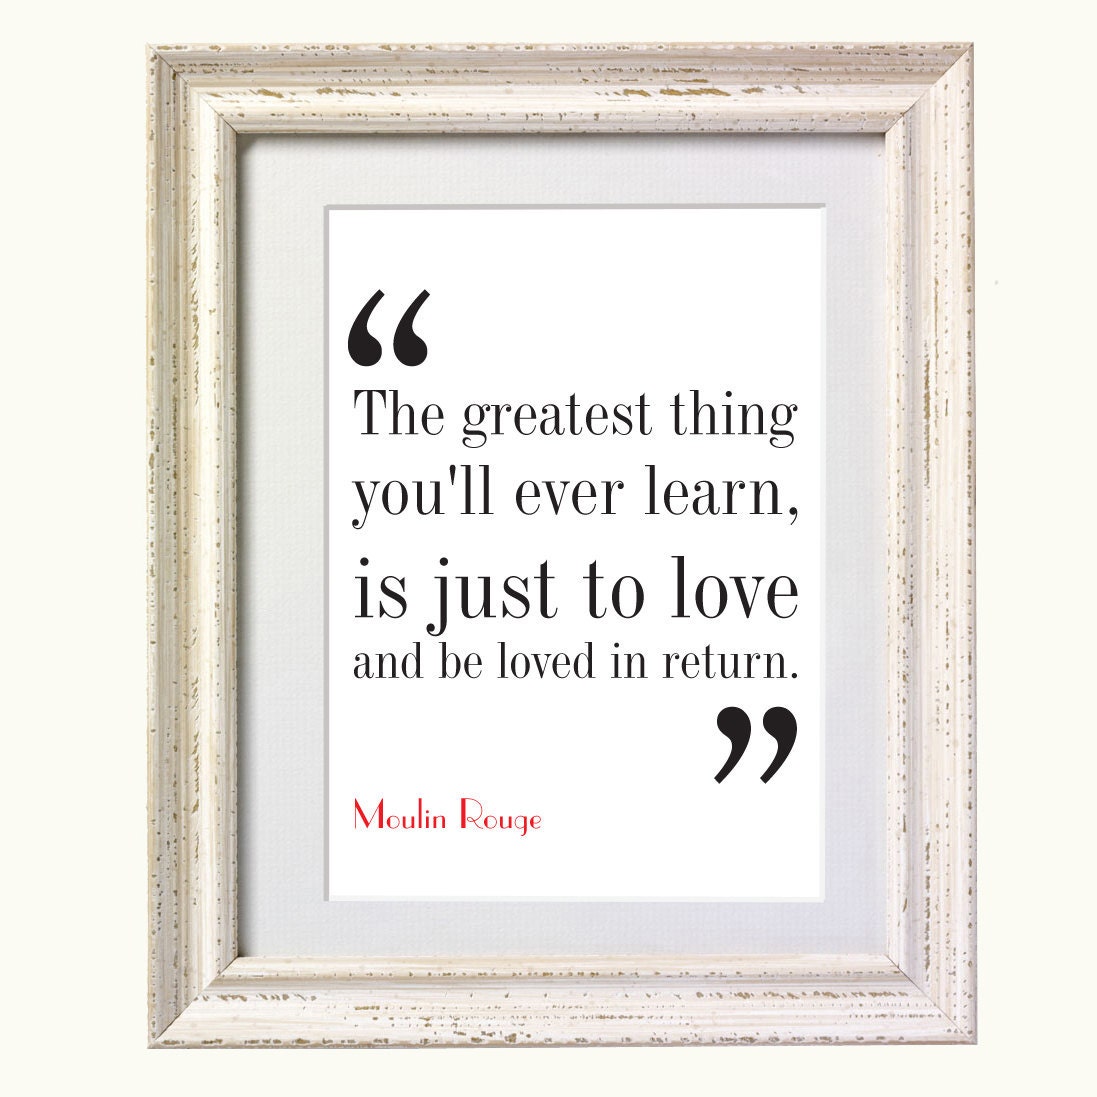 Moulin Rouge Movie Quote. Typography Print. by silvermoonprints